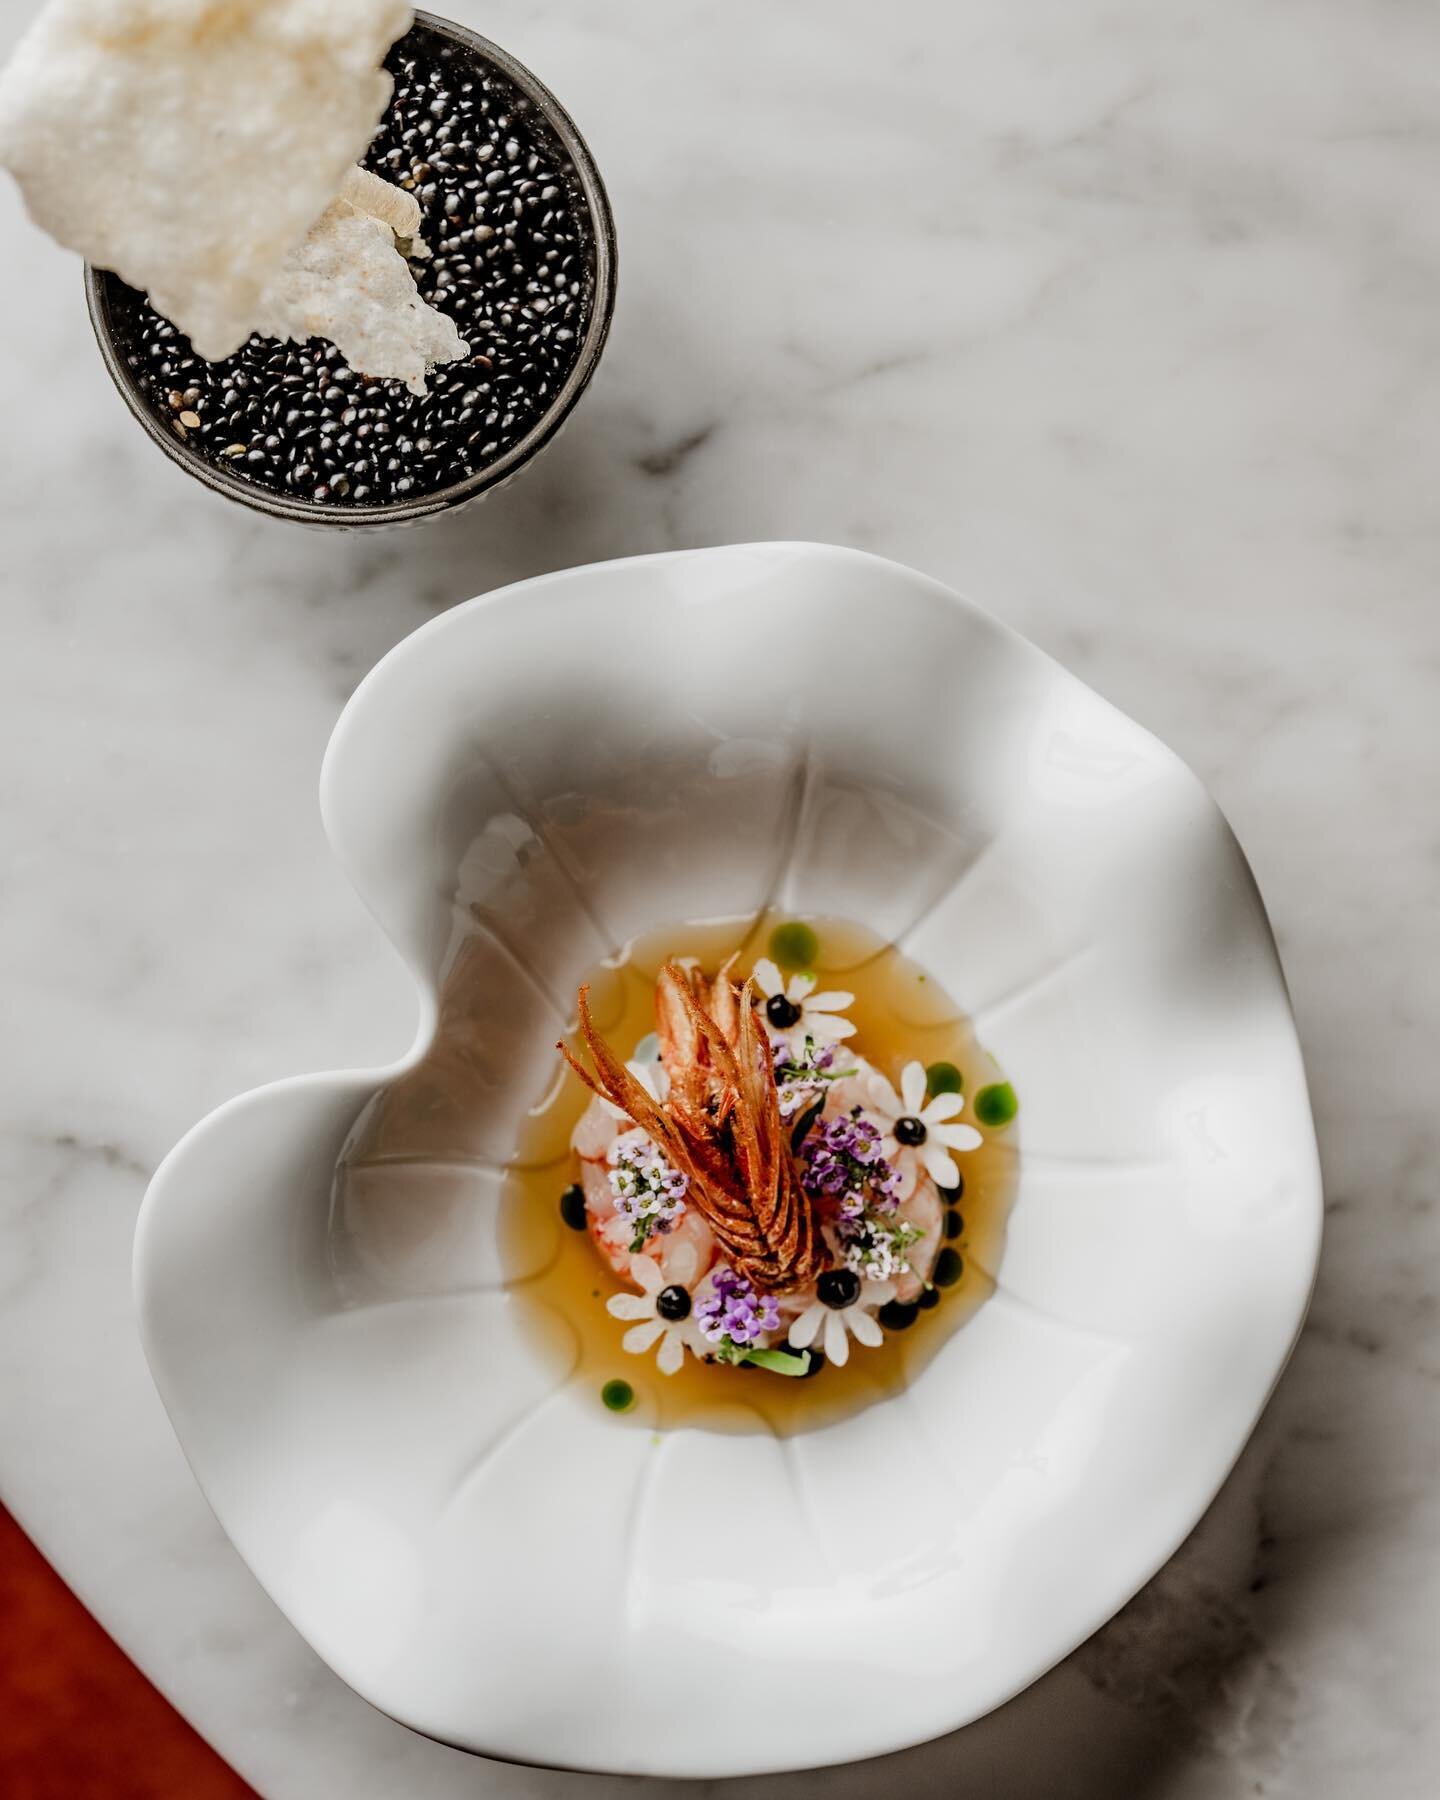 Spending the bank holiday in ☀️London? 
Why not join us and try this beauty 👇🏼

Red Sicilian prawn tartare | daikon | homemade mandarin ponzu | prawn crackers

@gaetanof_88 
@f_diego 
@emily_roux_london 

#foodphotography 
#foodart 
#mymuybueno 
#o